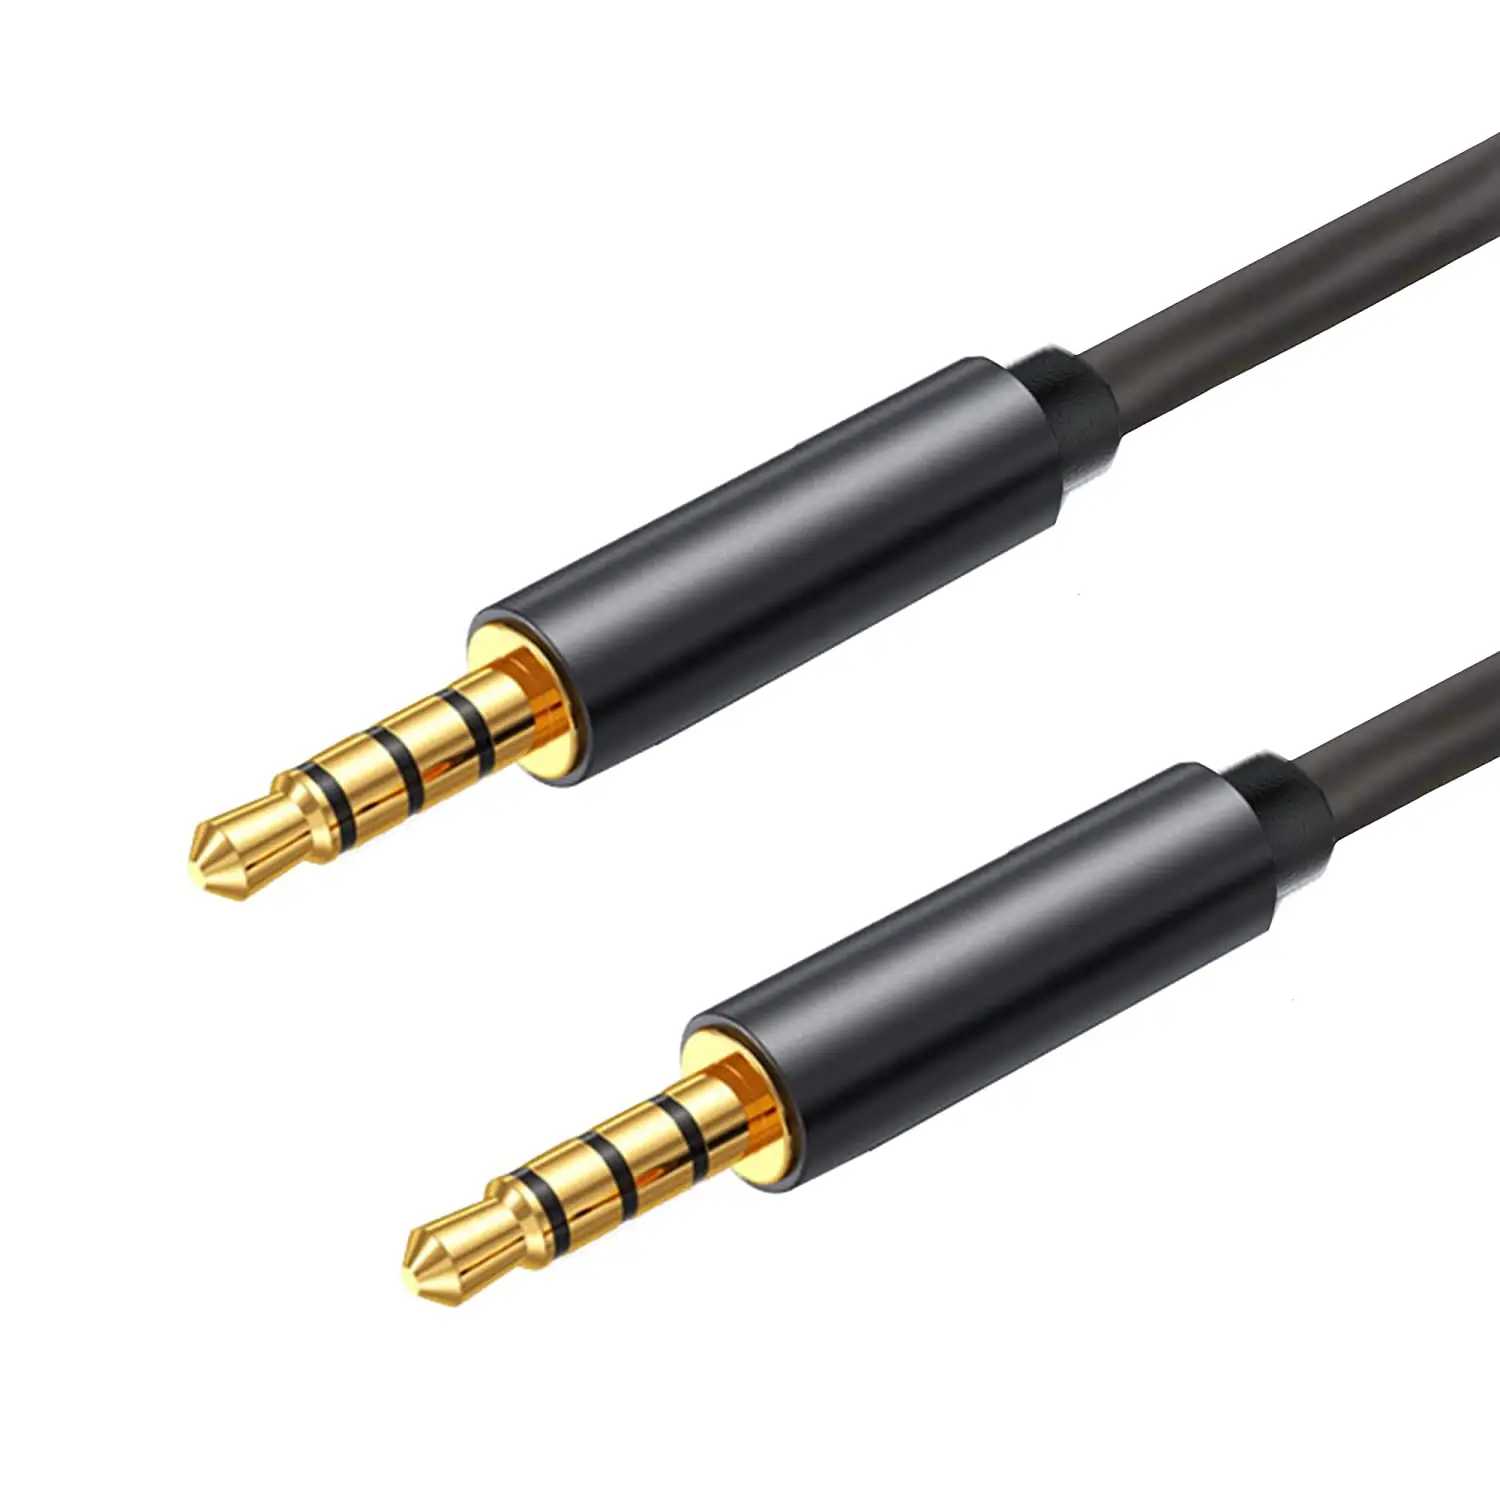 5.9FT/1.8M 3.5mm Audio Cable gold plated 3.5mm audio aux cable Auxiliary Input Male to Male for Headphones Speaker